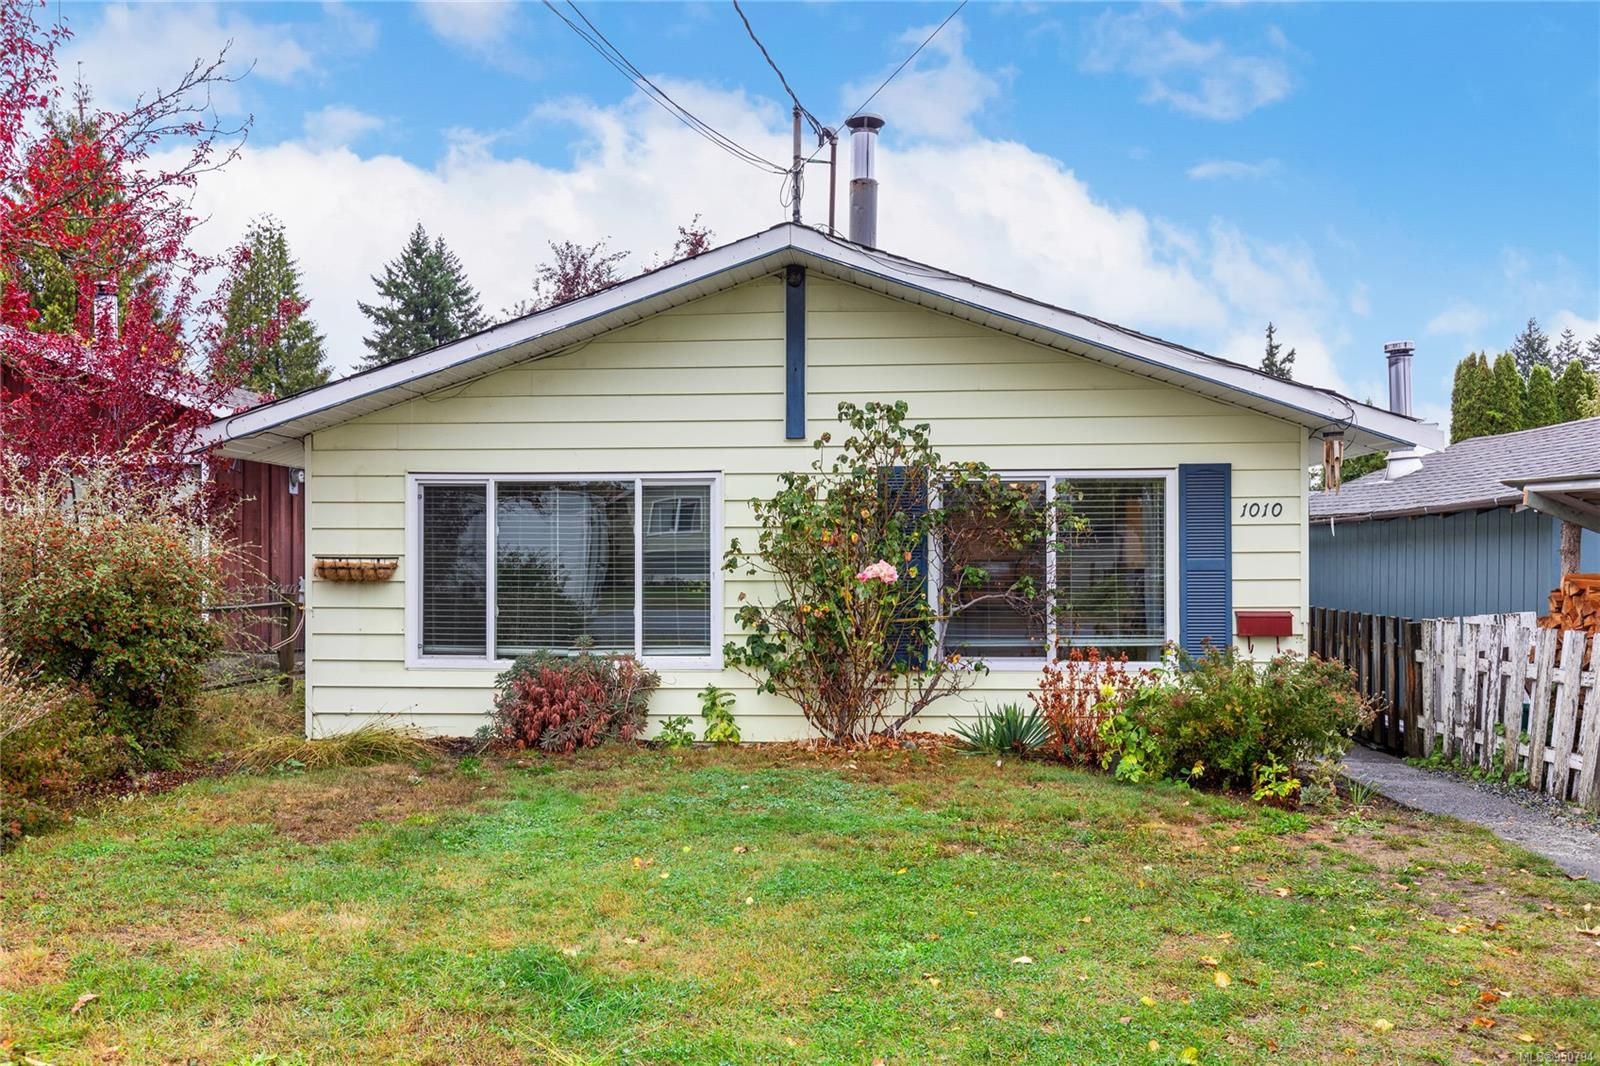 I have sold a property at 1010 St. David St in Nanaimo
